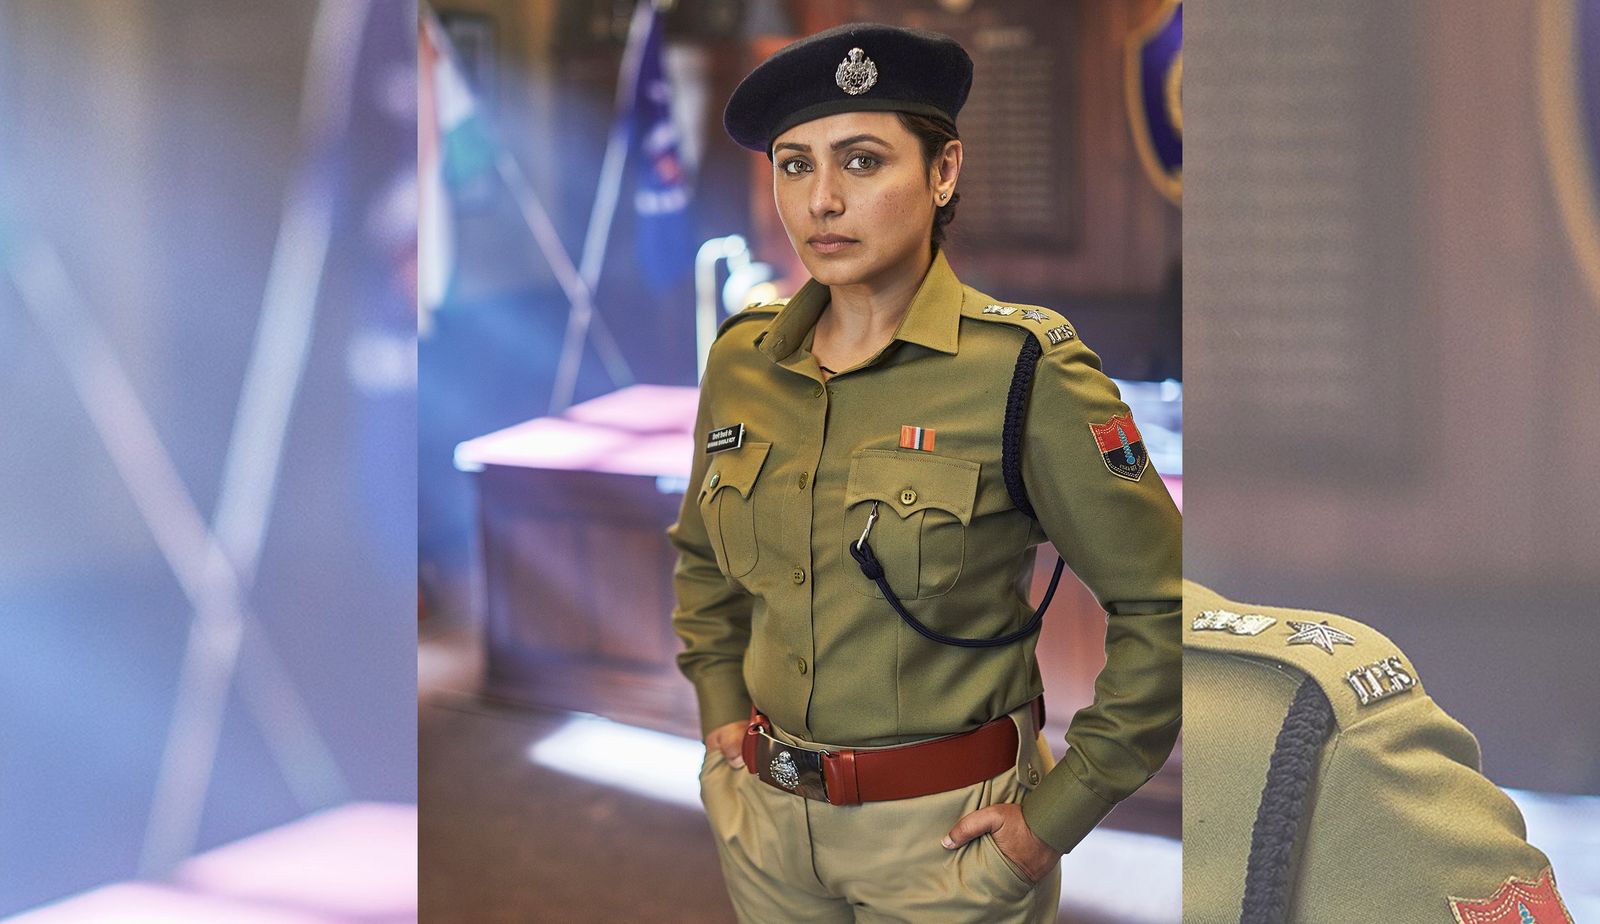 Rani Mukerji And Makers Of Mardaani 2 Reveal The Horrific Incidents The Film Is Based On